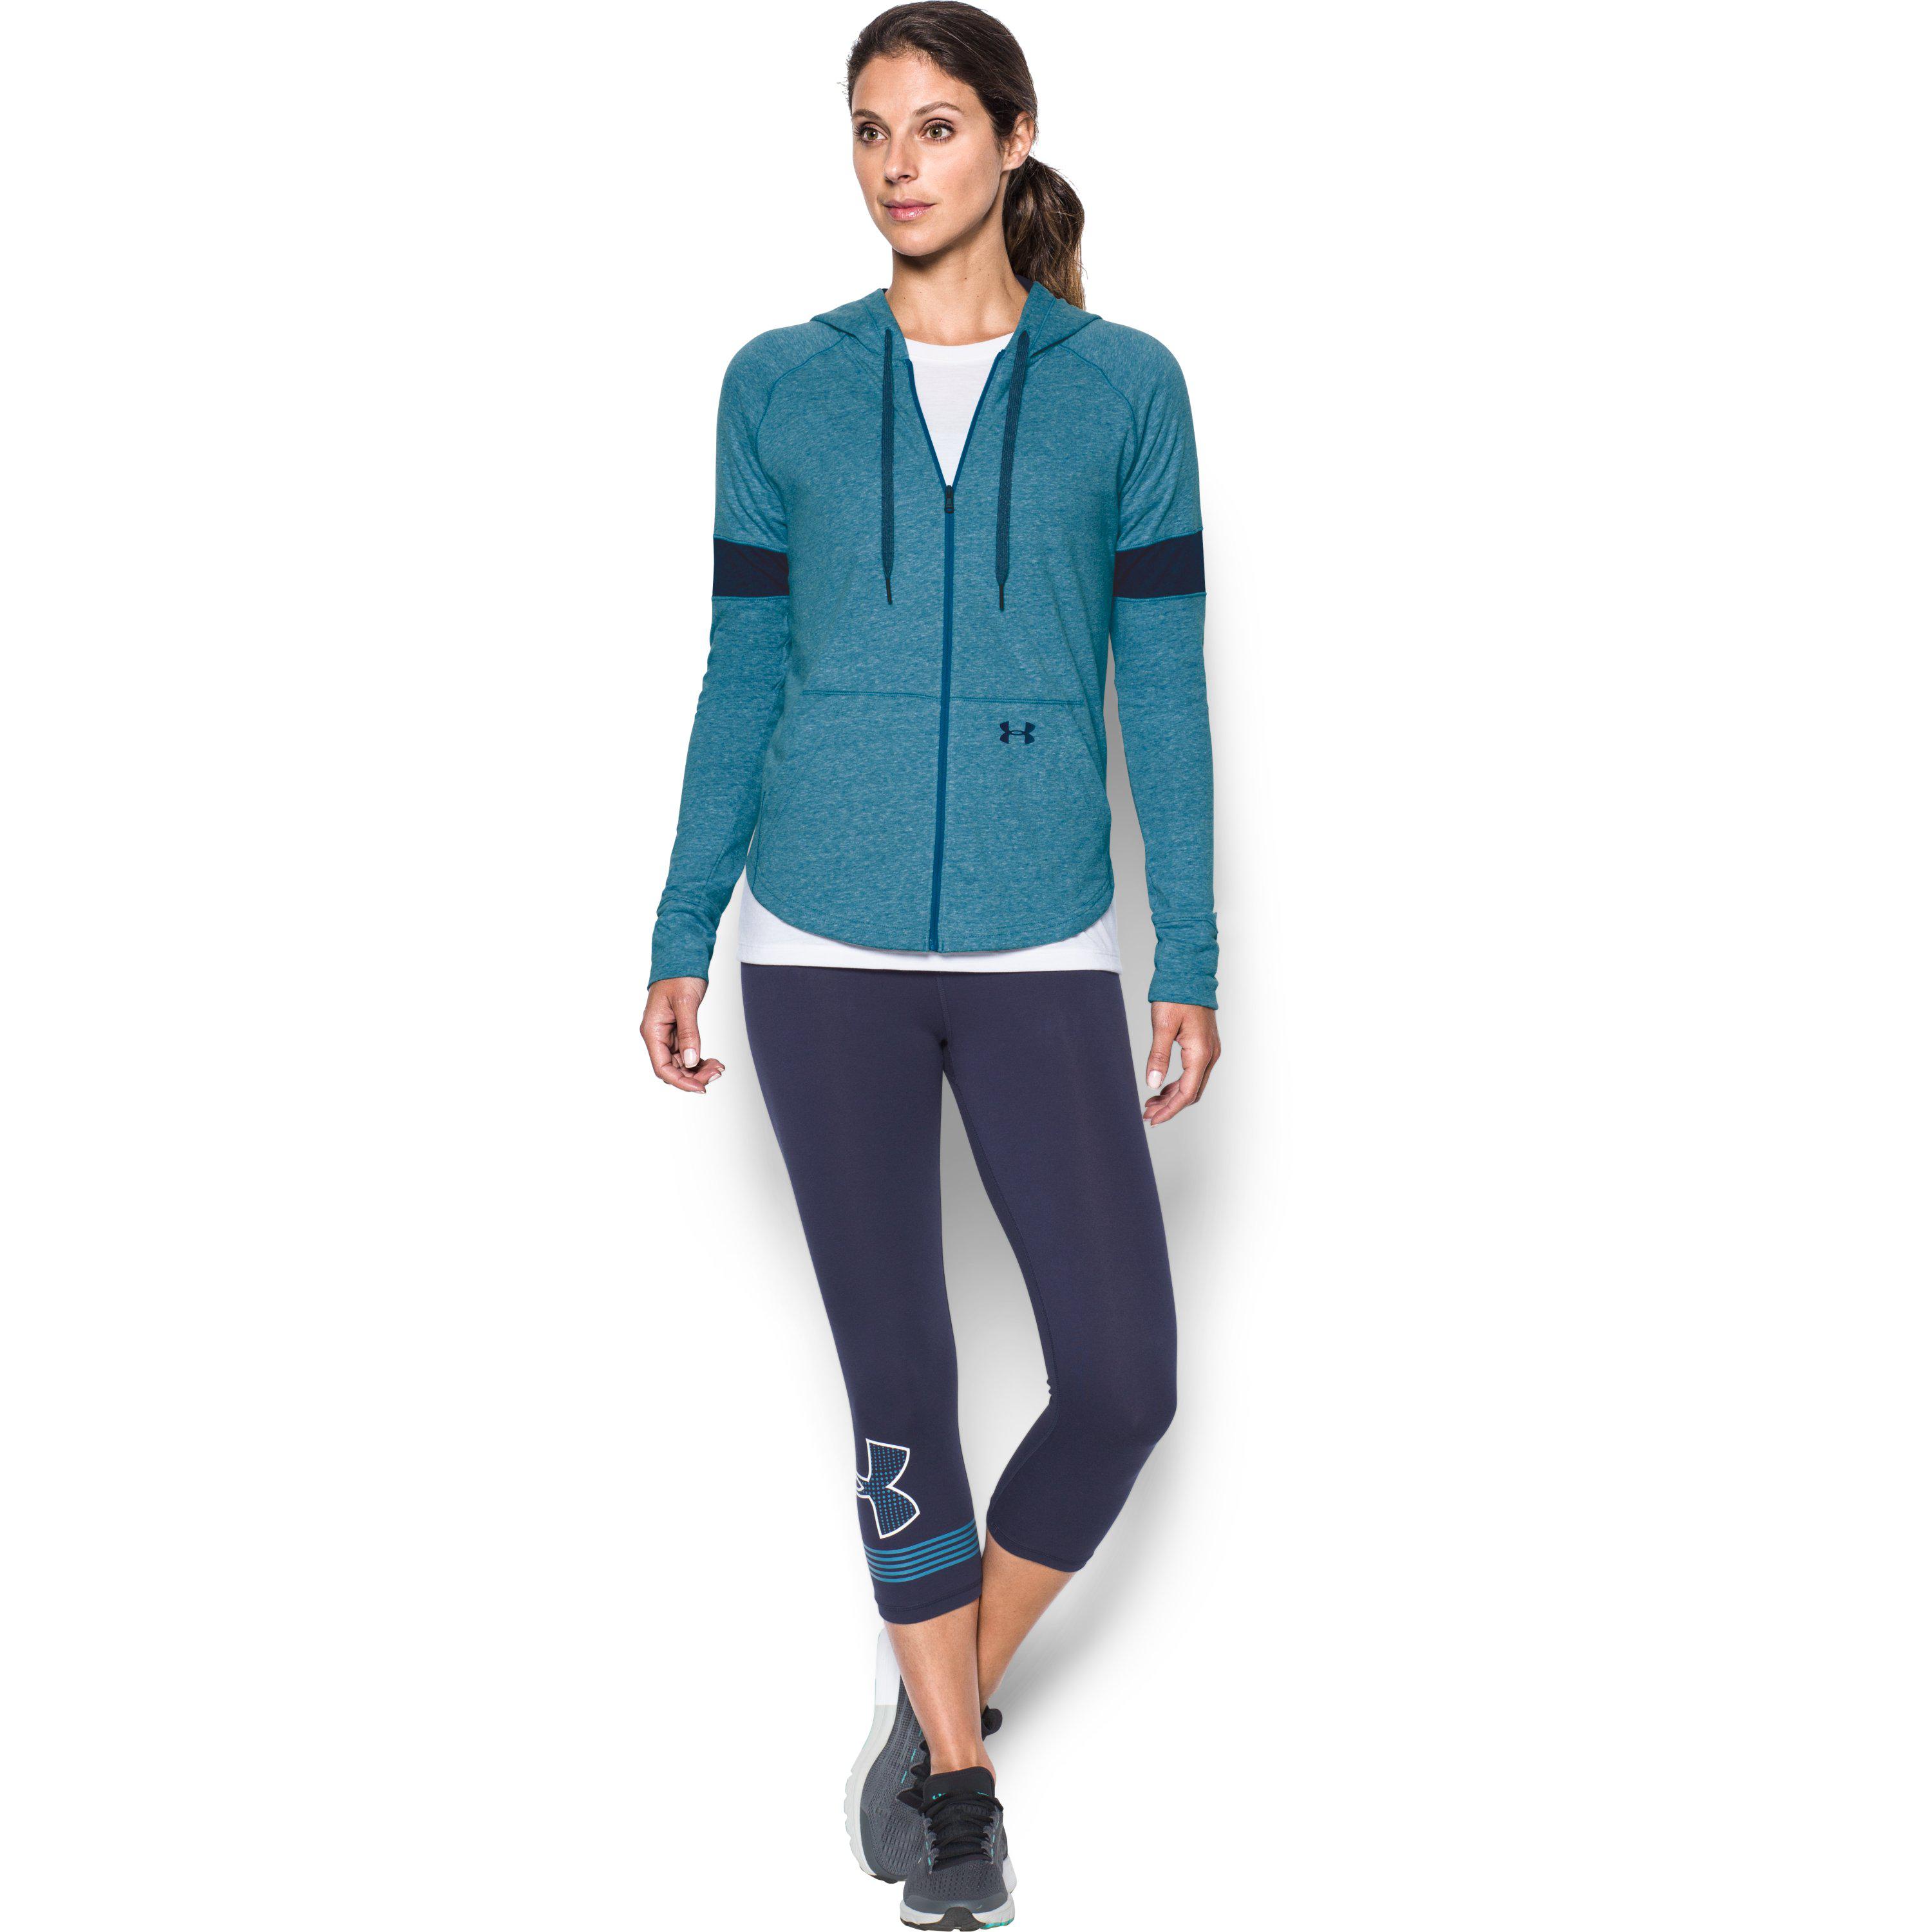 under armour hoodies womens